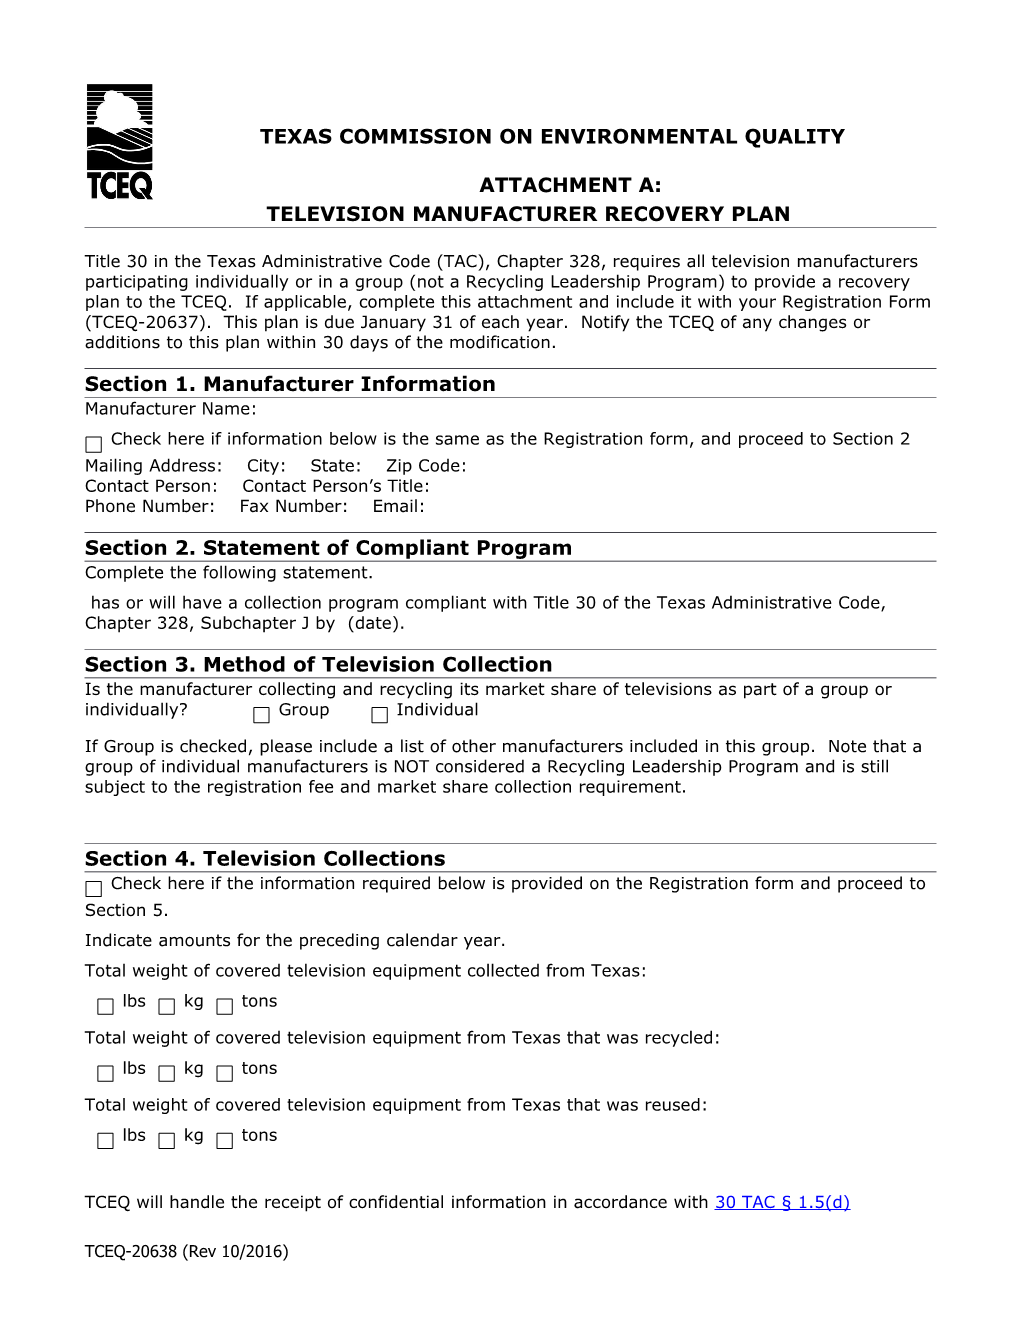 Texas Commission on Environmental Qualityattachment A:Television Manufacturer Recovery Plan